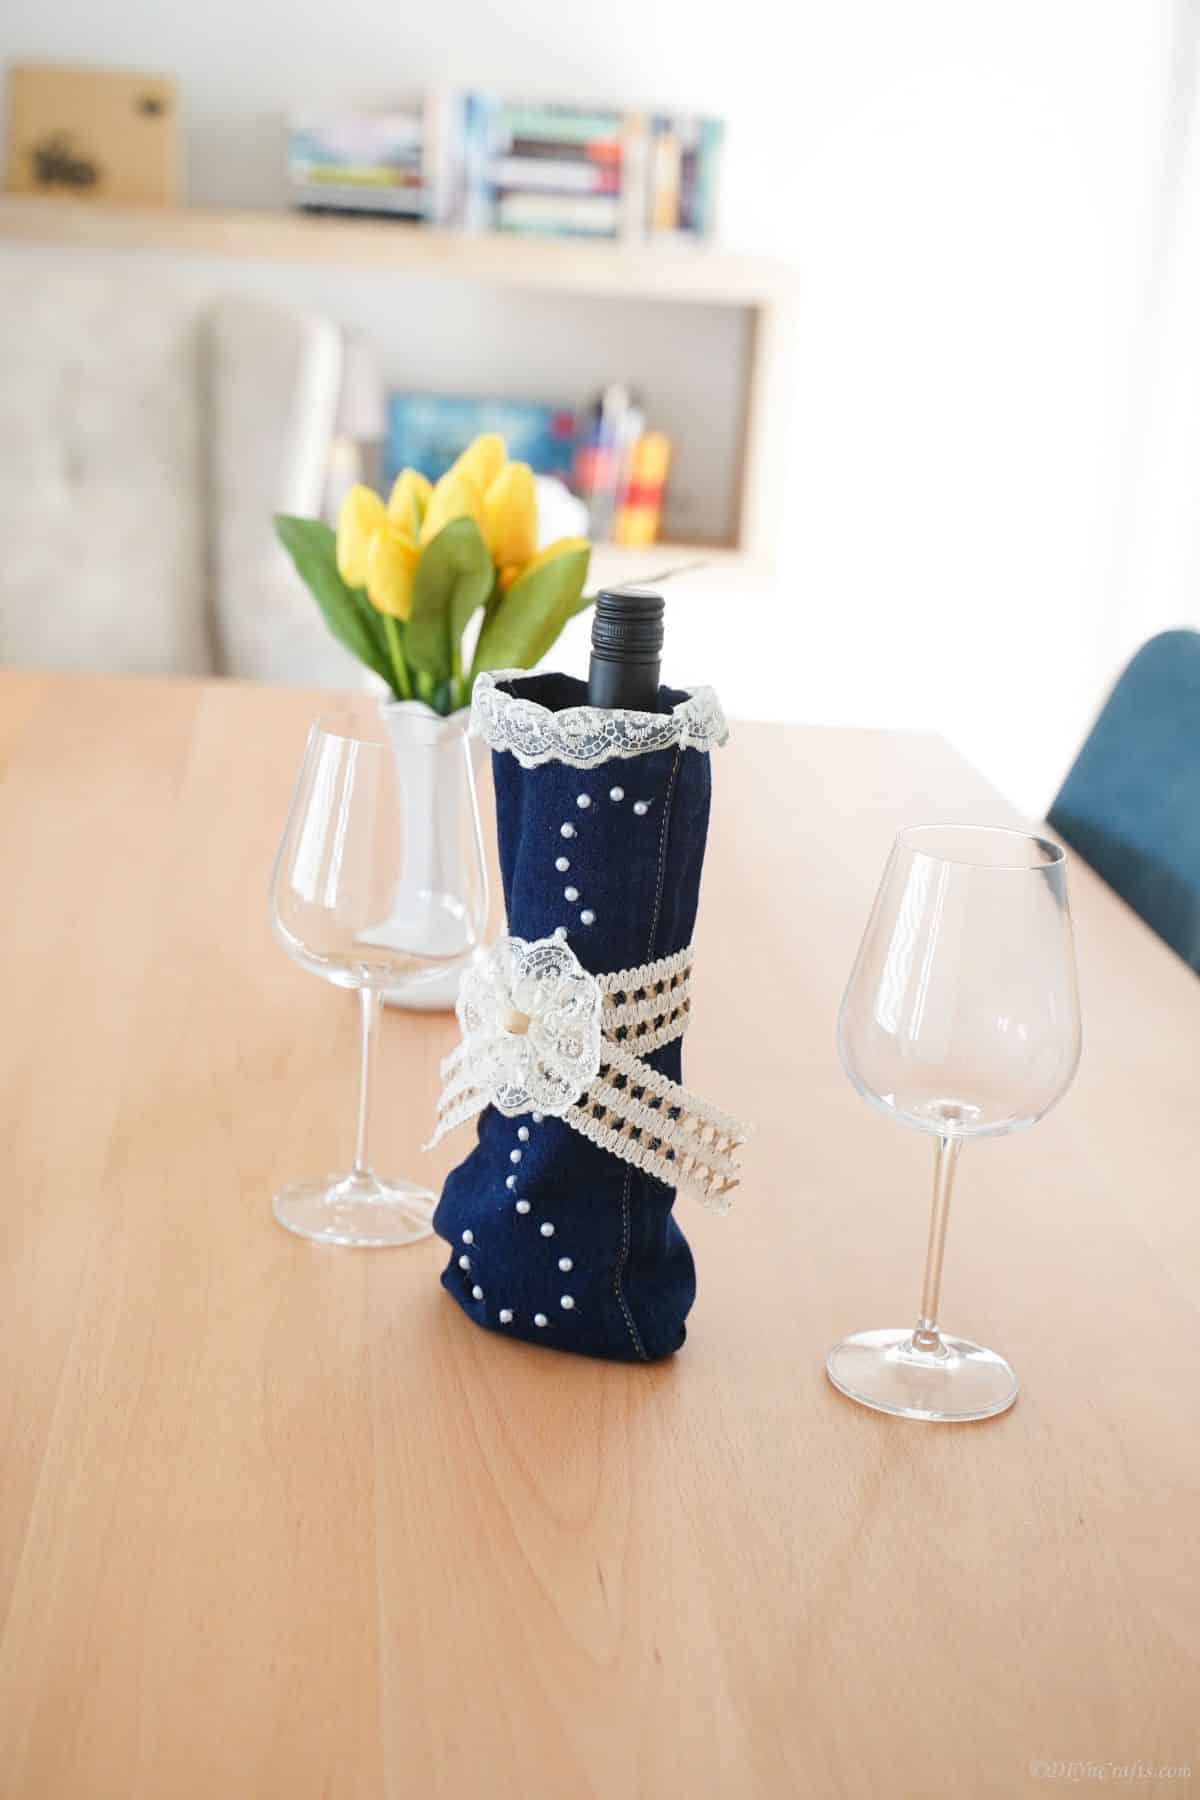 denim wine bottle cover sitting on table with blue chairs